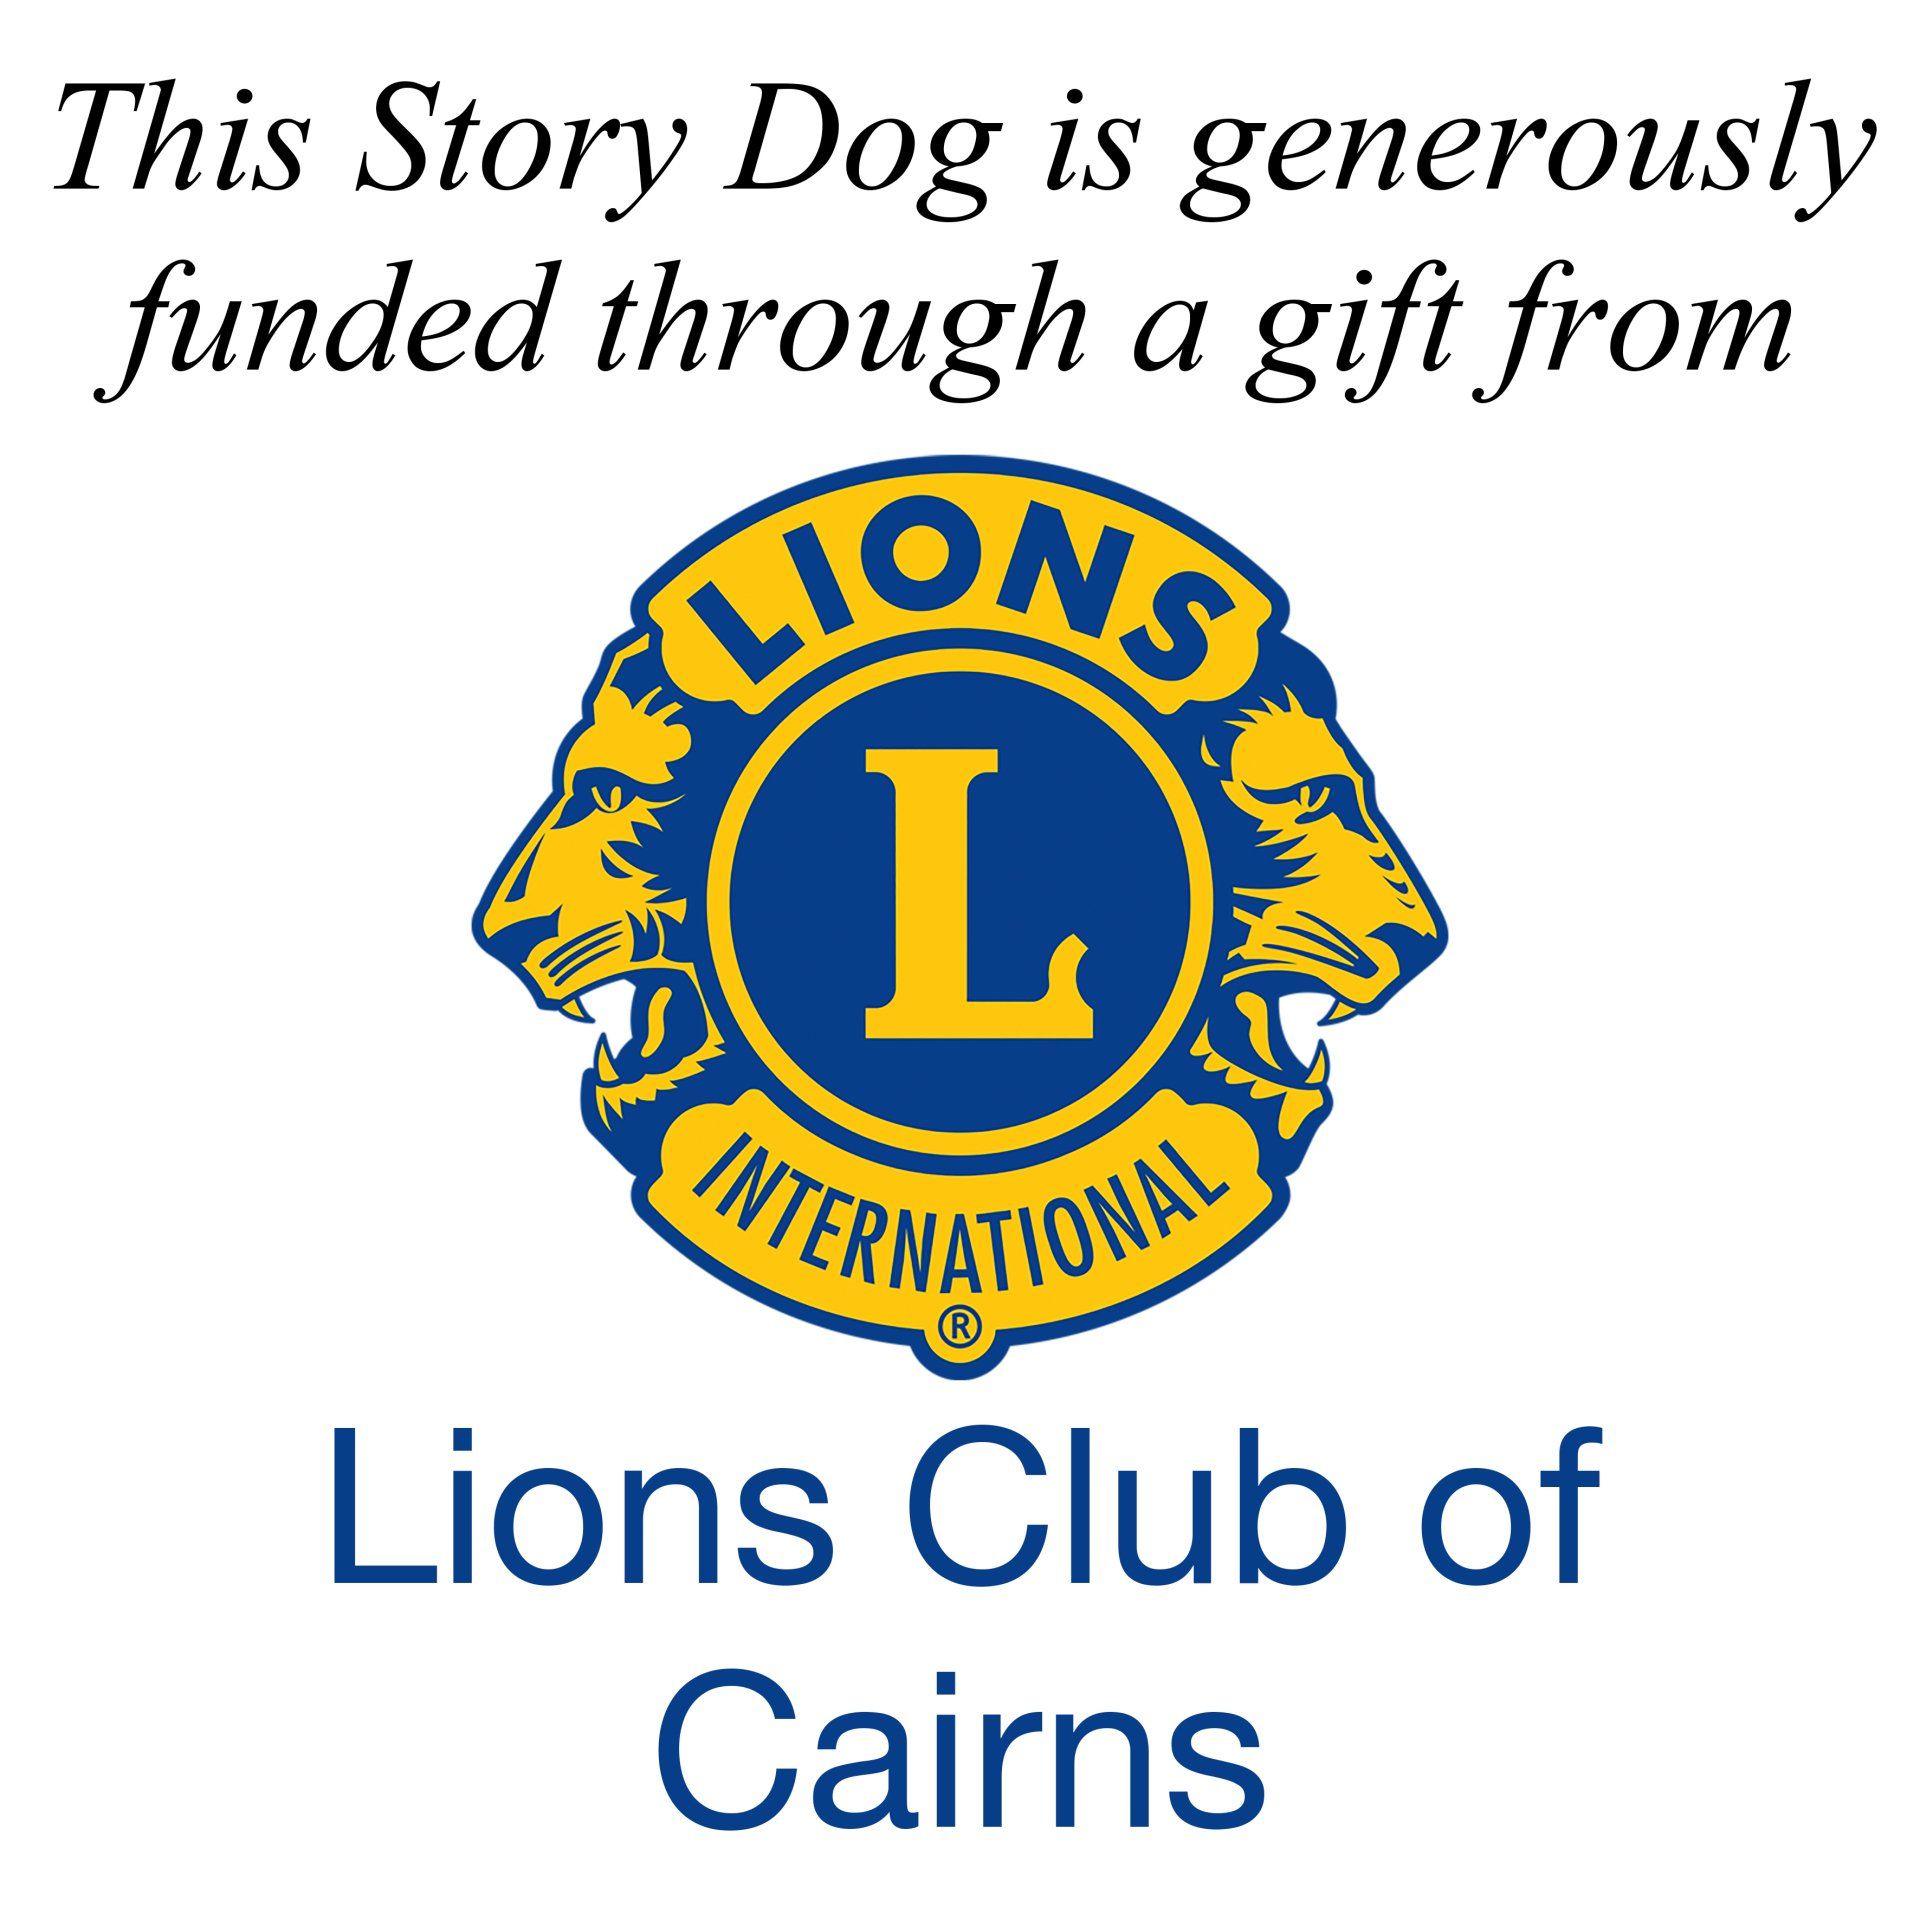 Lions Club of Cairns